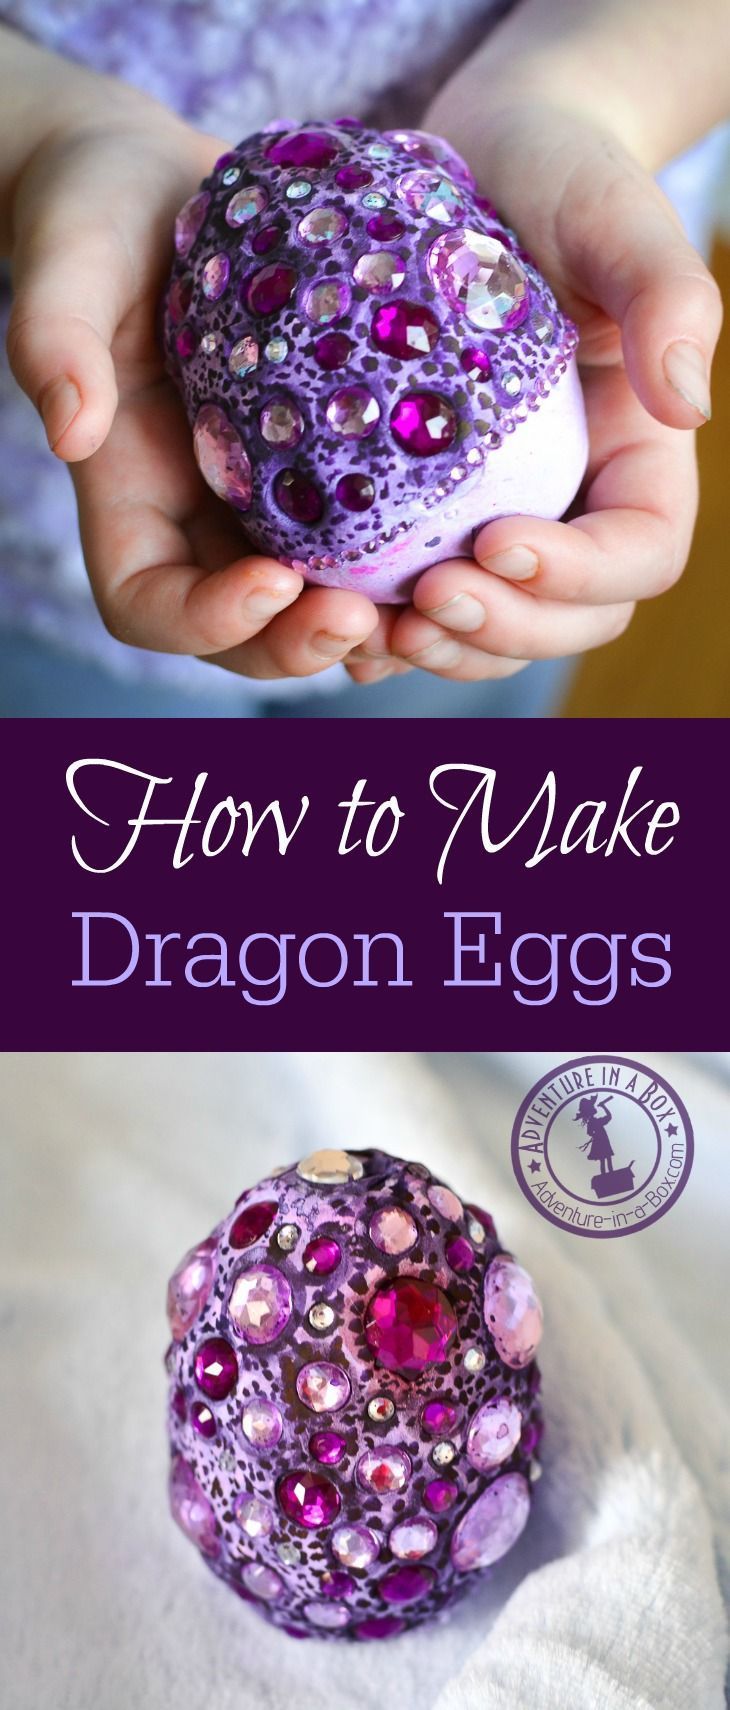 How to make dragon eggs from air-dry clay. Beautiful fantasy craft for kids. Fun project for Easter and all year round!